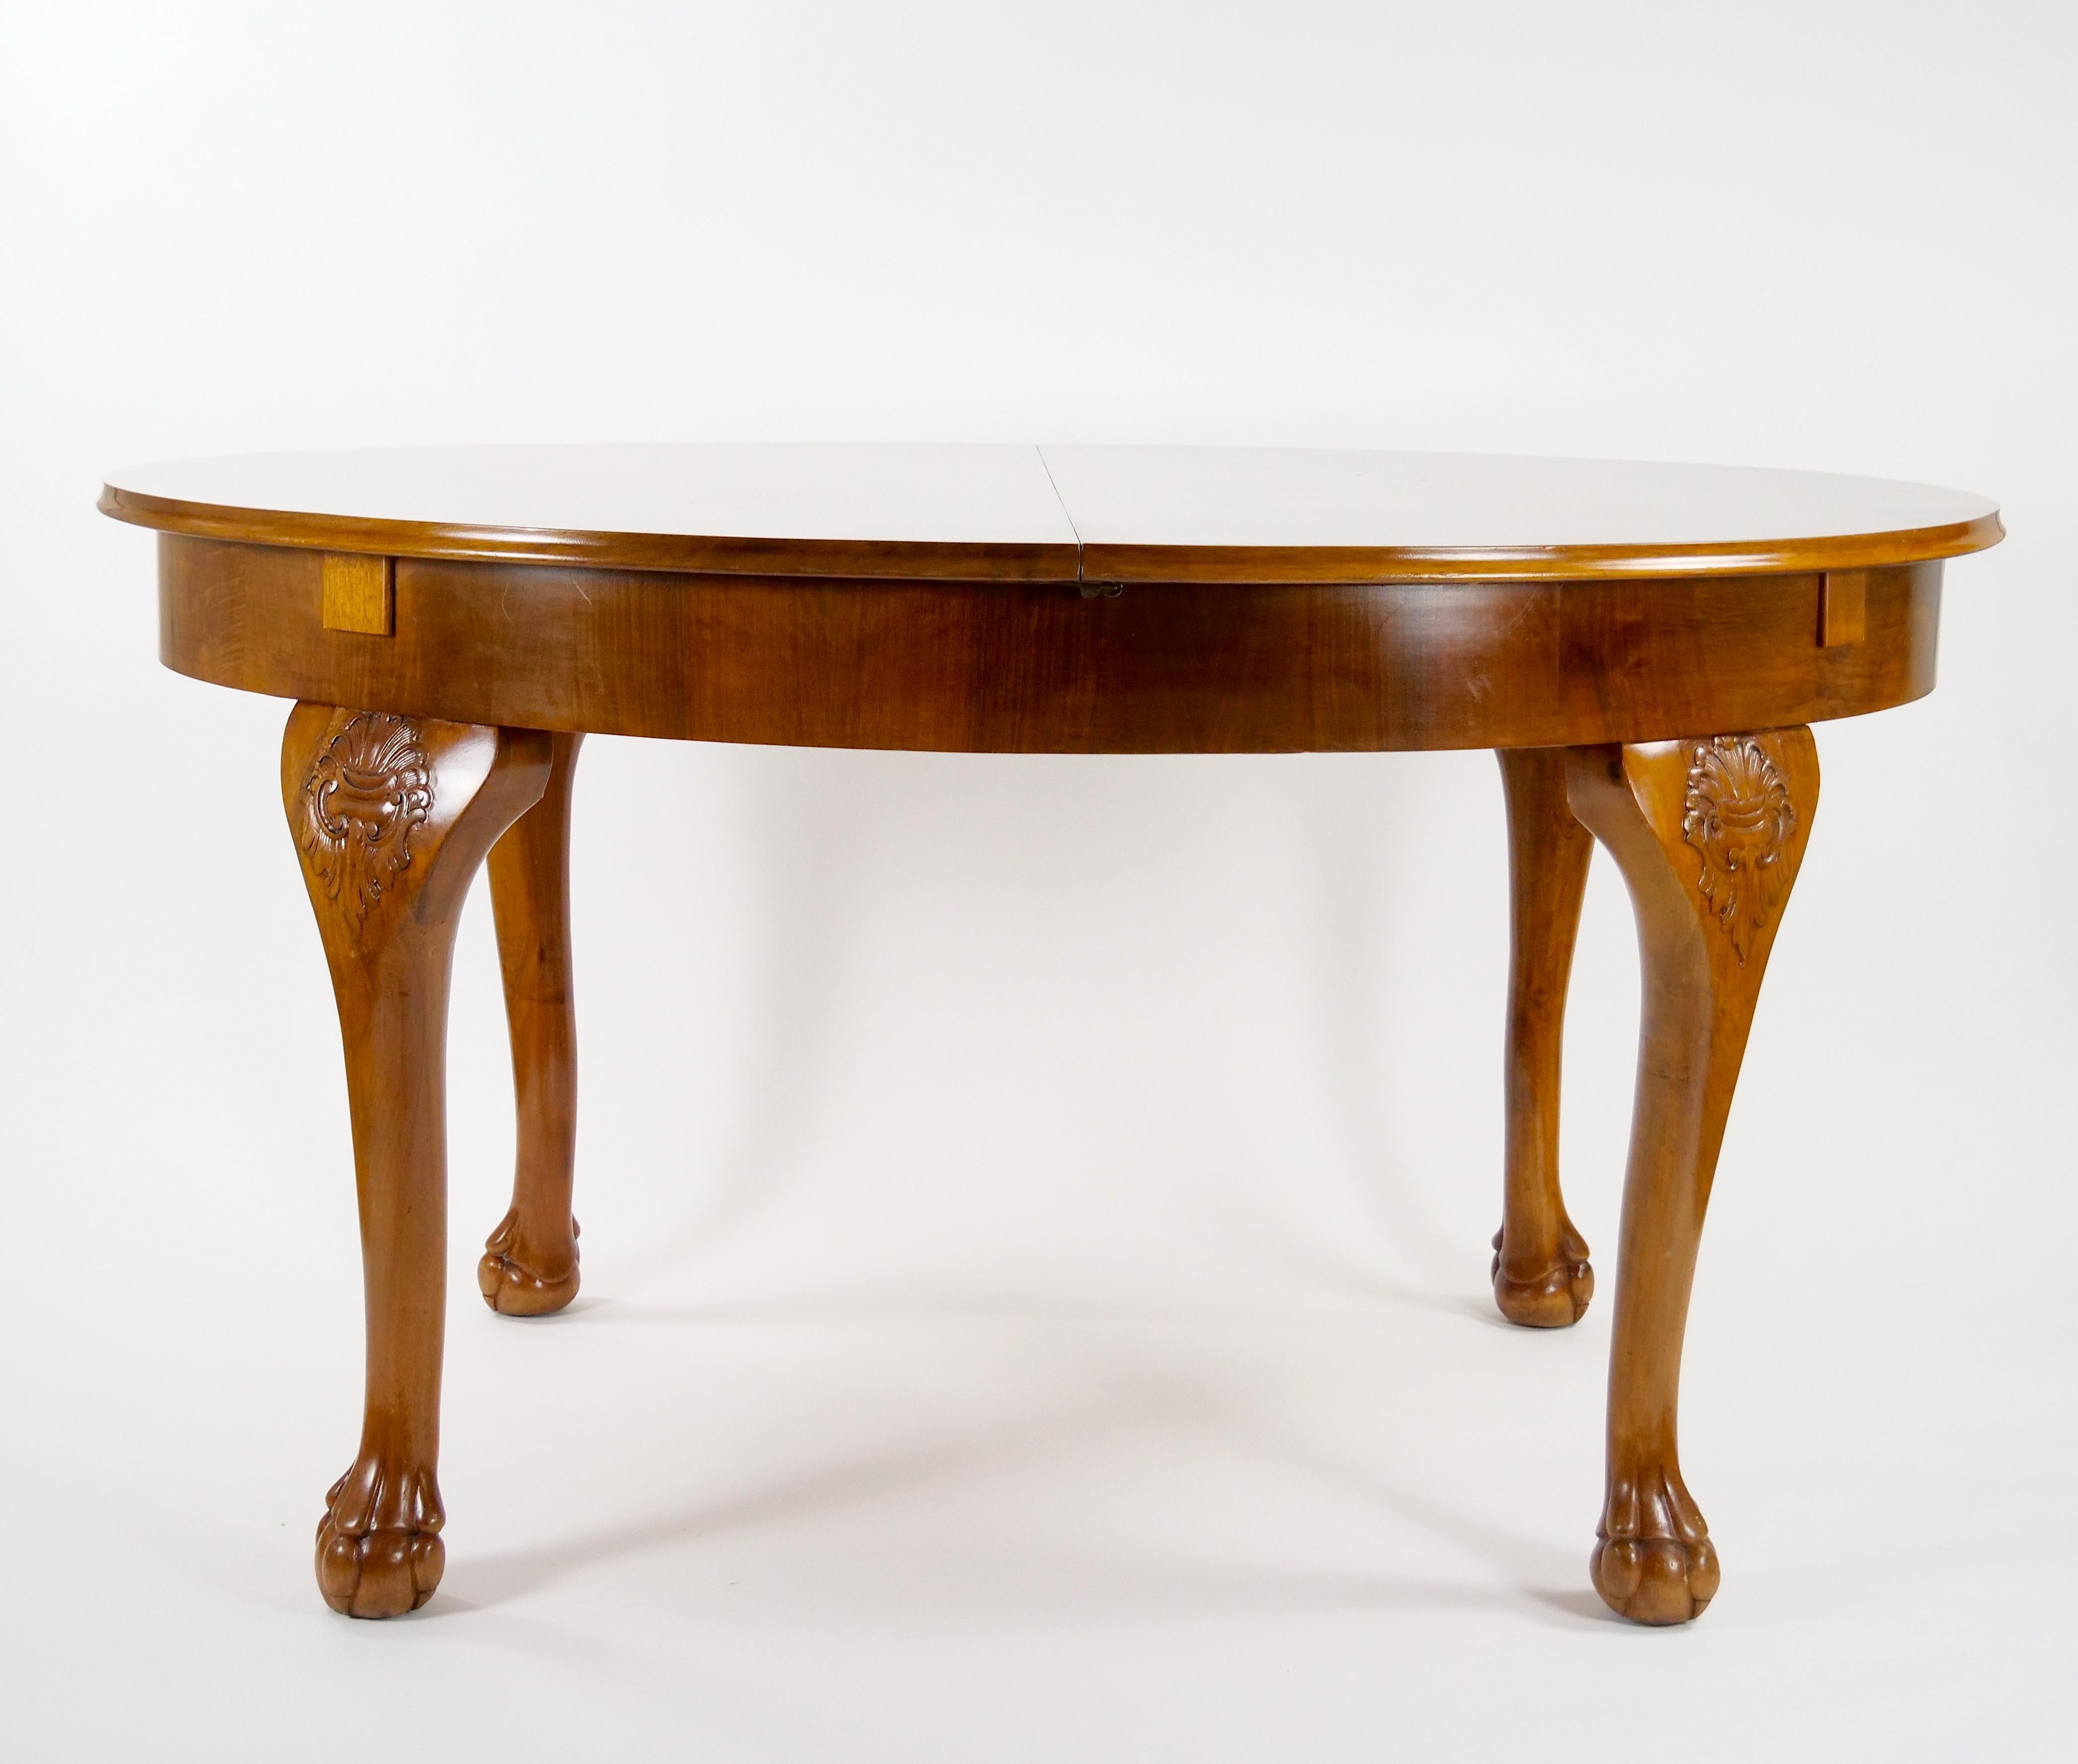 Hand-Carved Early 20th Century Italian Hand Carved Walnut Neoclassical Style Dining Table For Sale